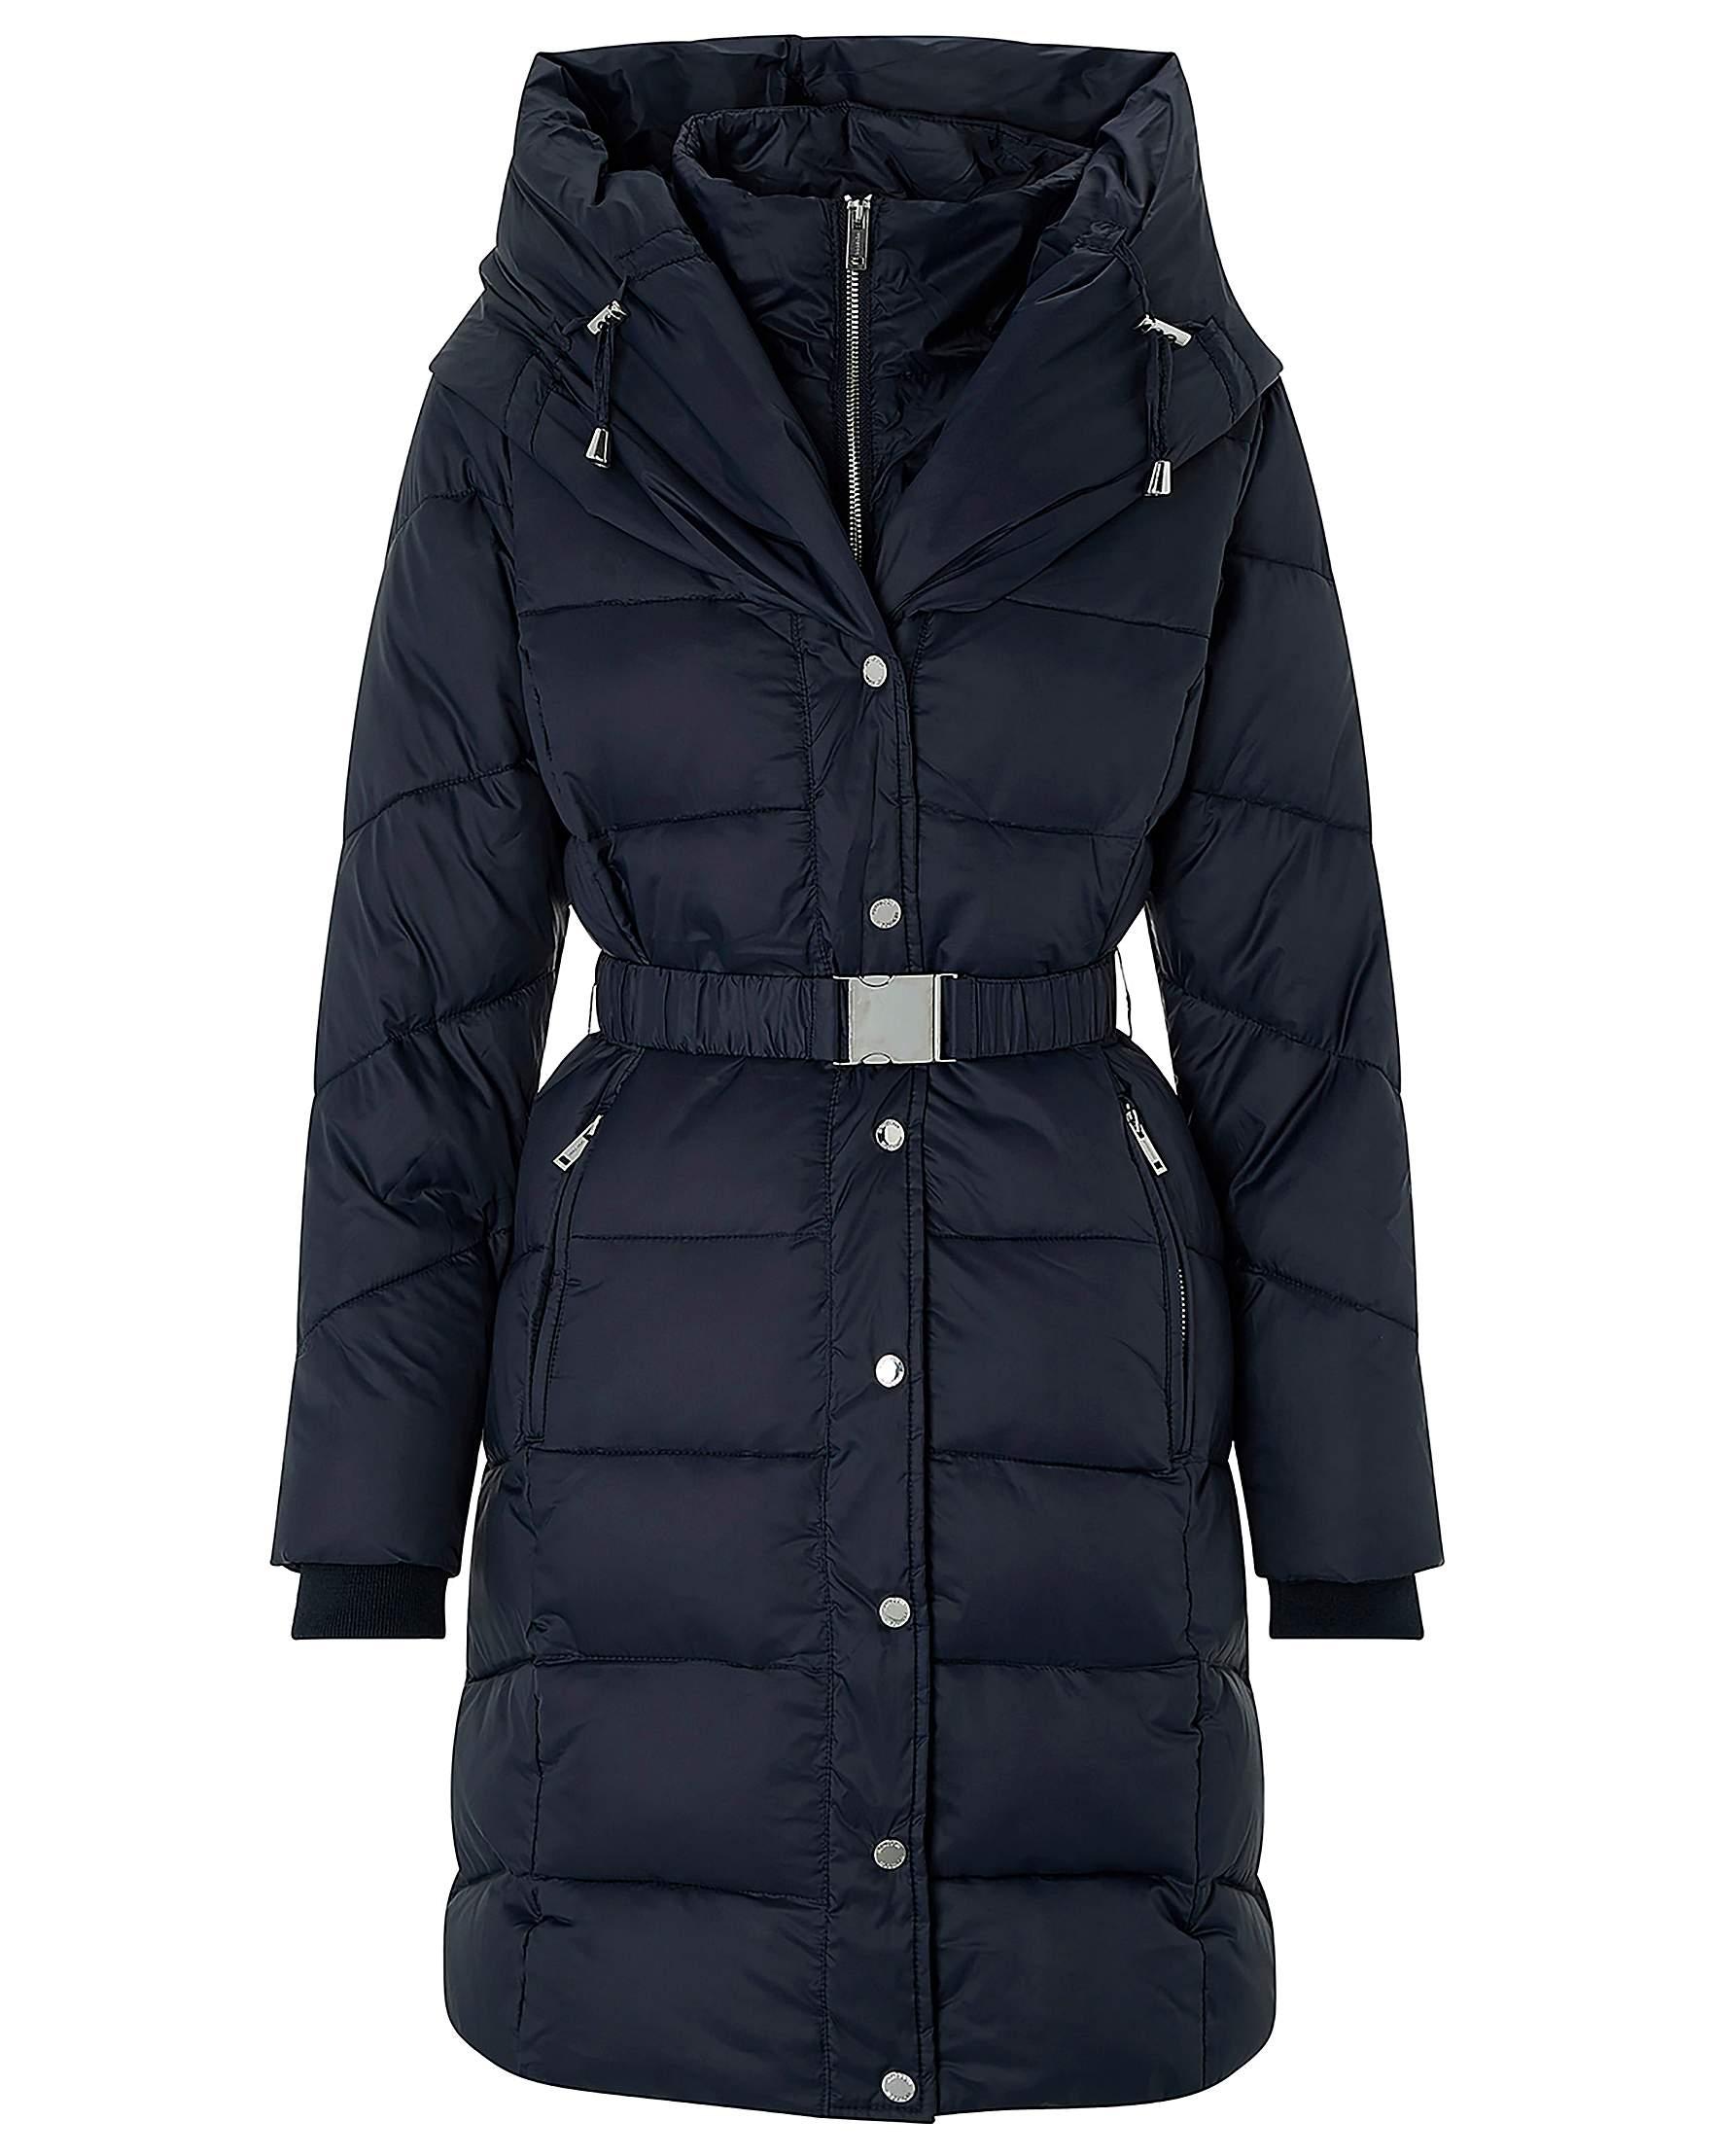 Monsoon Synthetic Laurel Belted Shawl Padded Coat in Navy (Blue) - Lyst